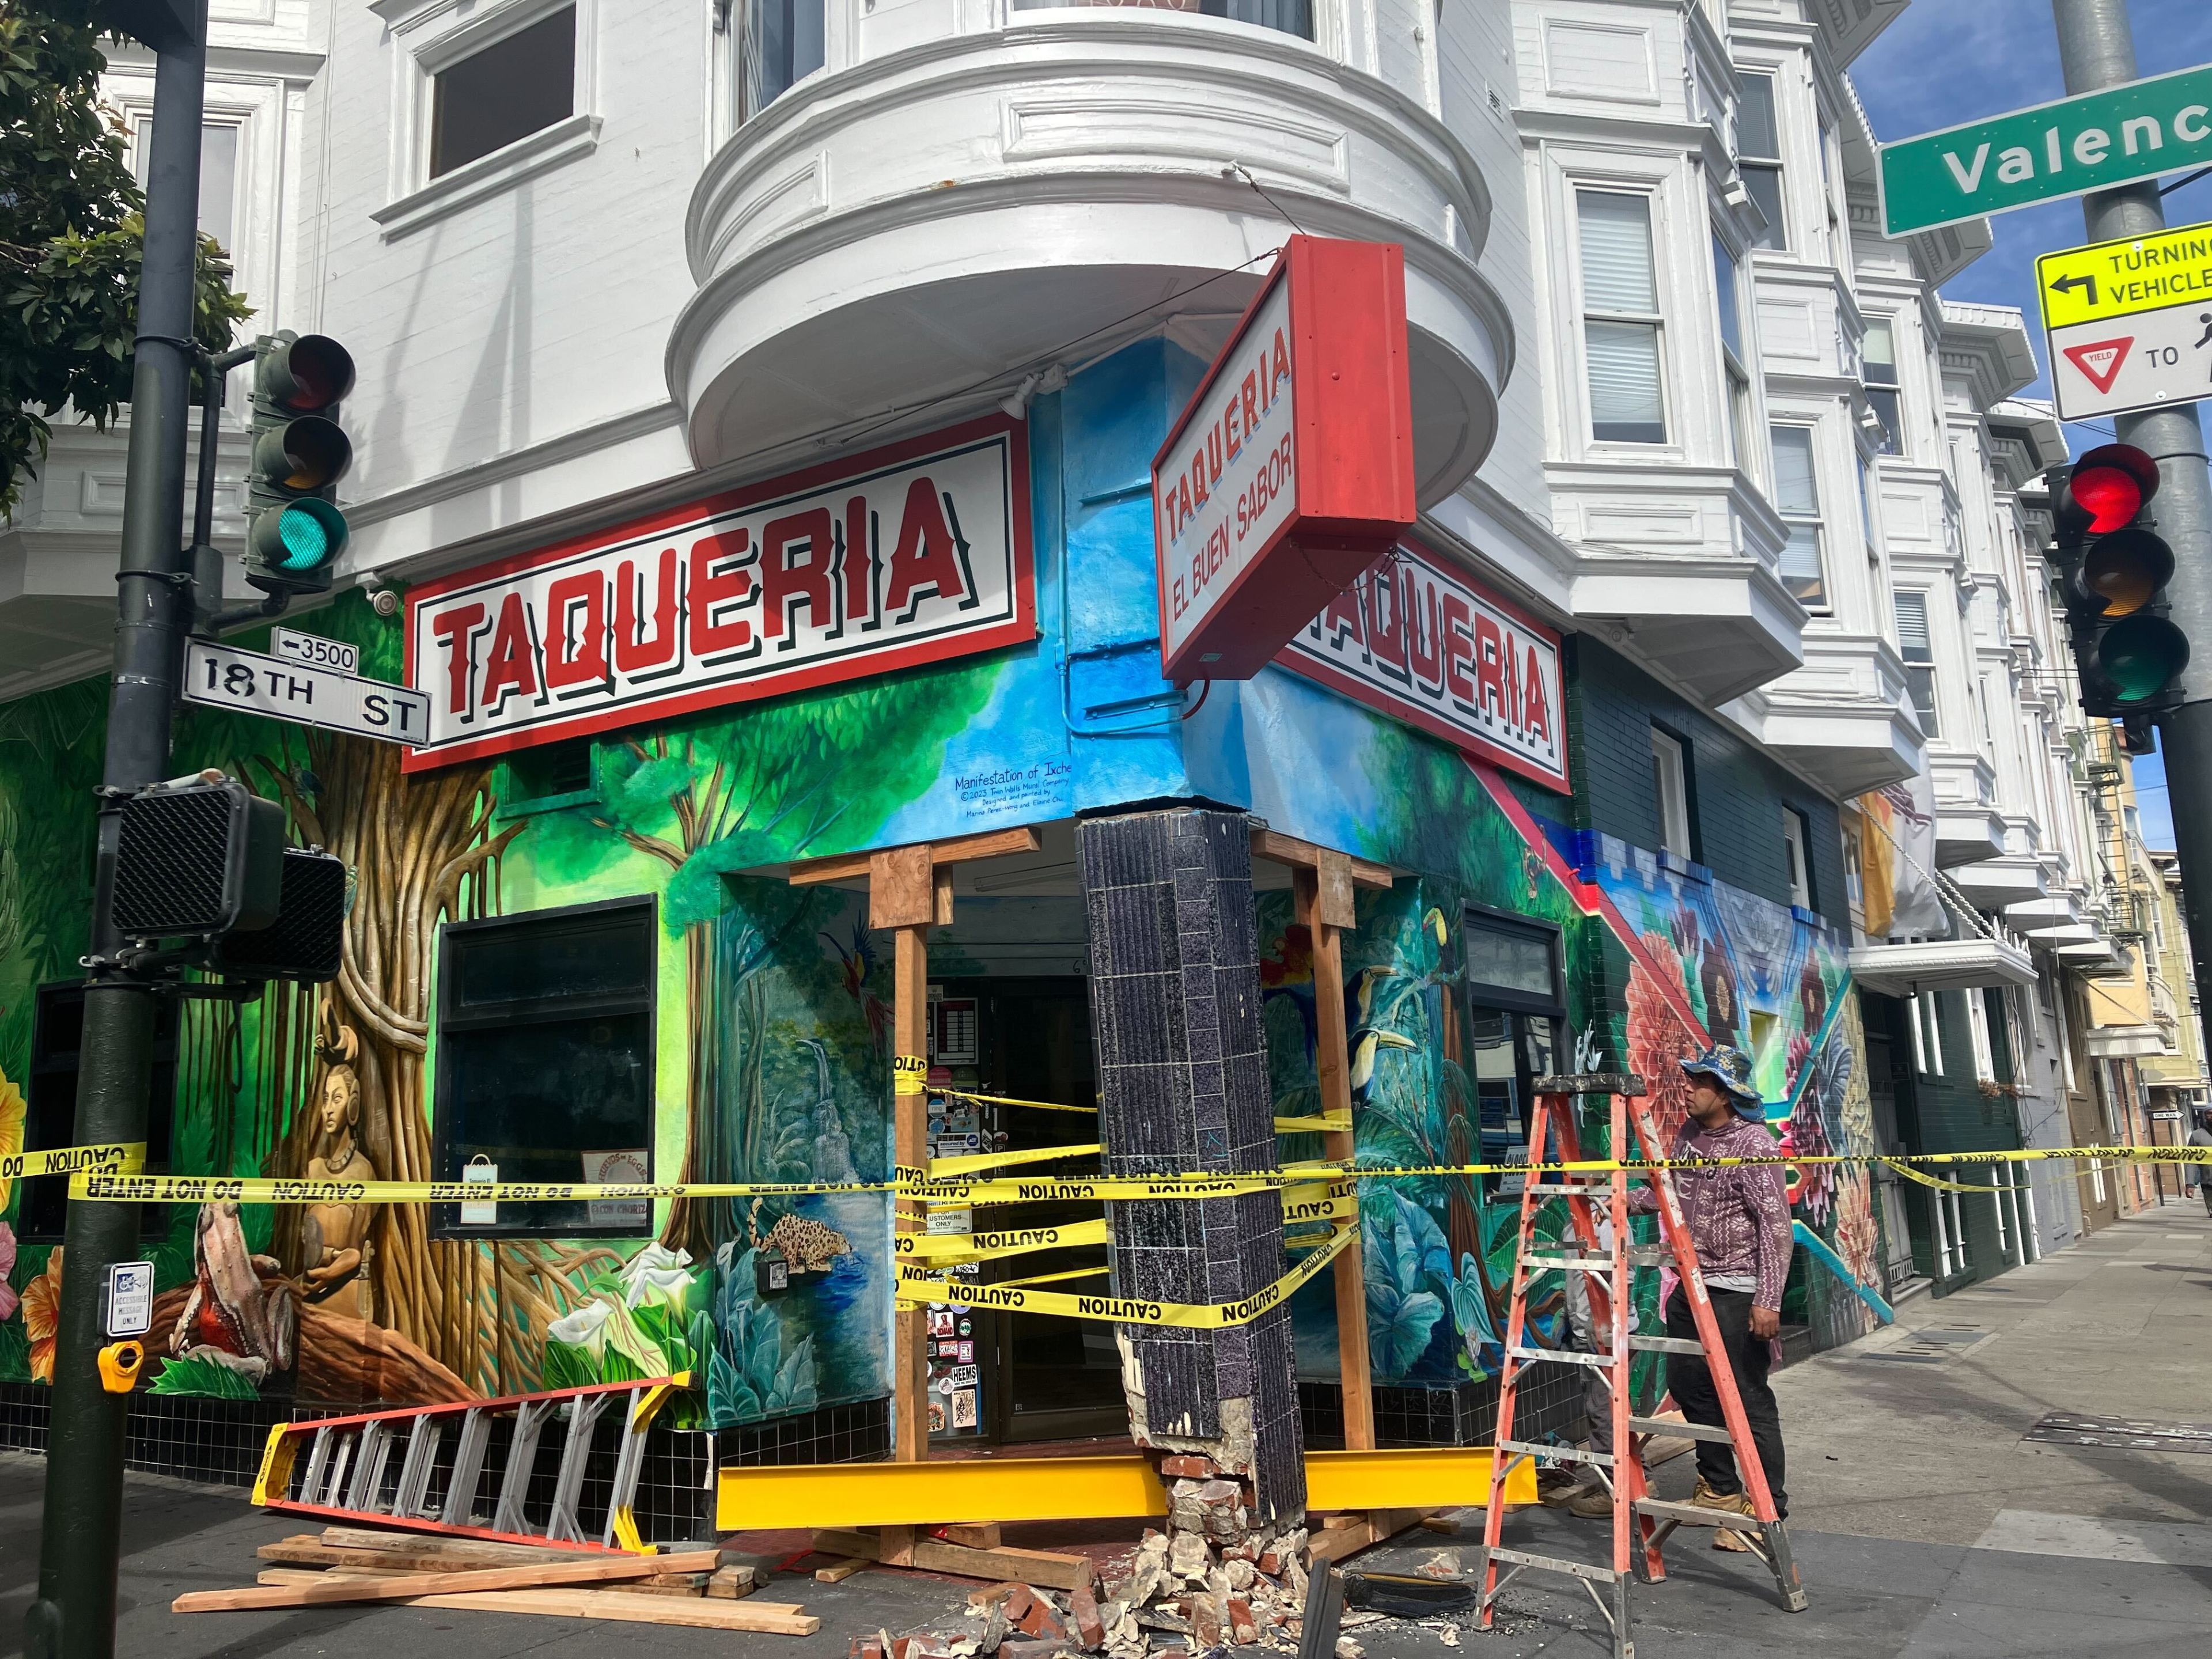 A damaged taqueria at a street corner, with colorful murals and caution tape, under repair by a person on a ladder.